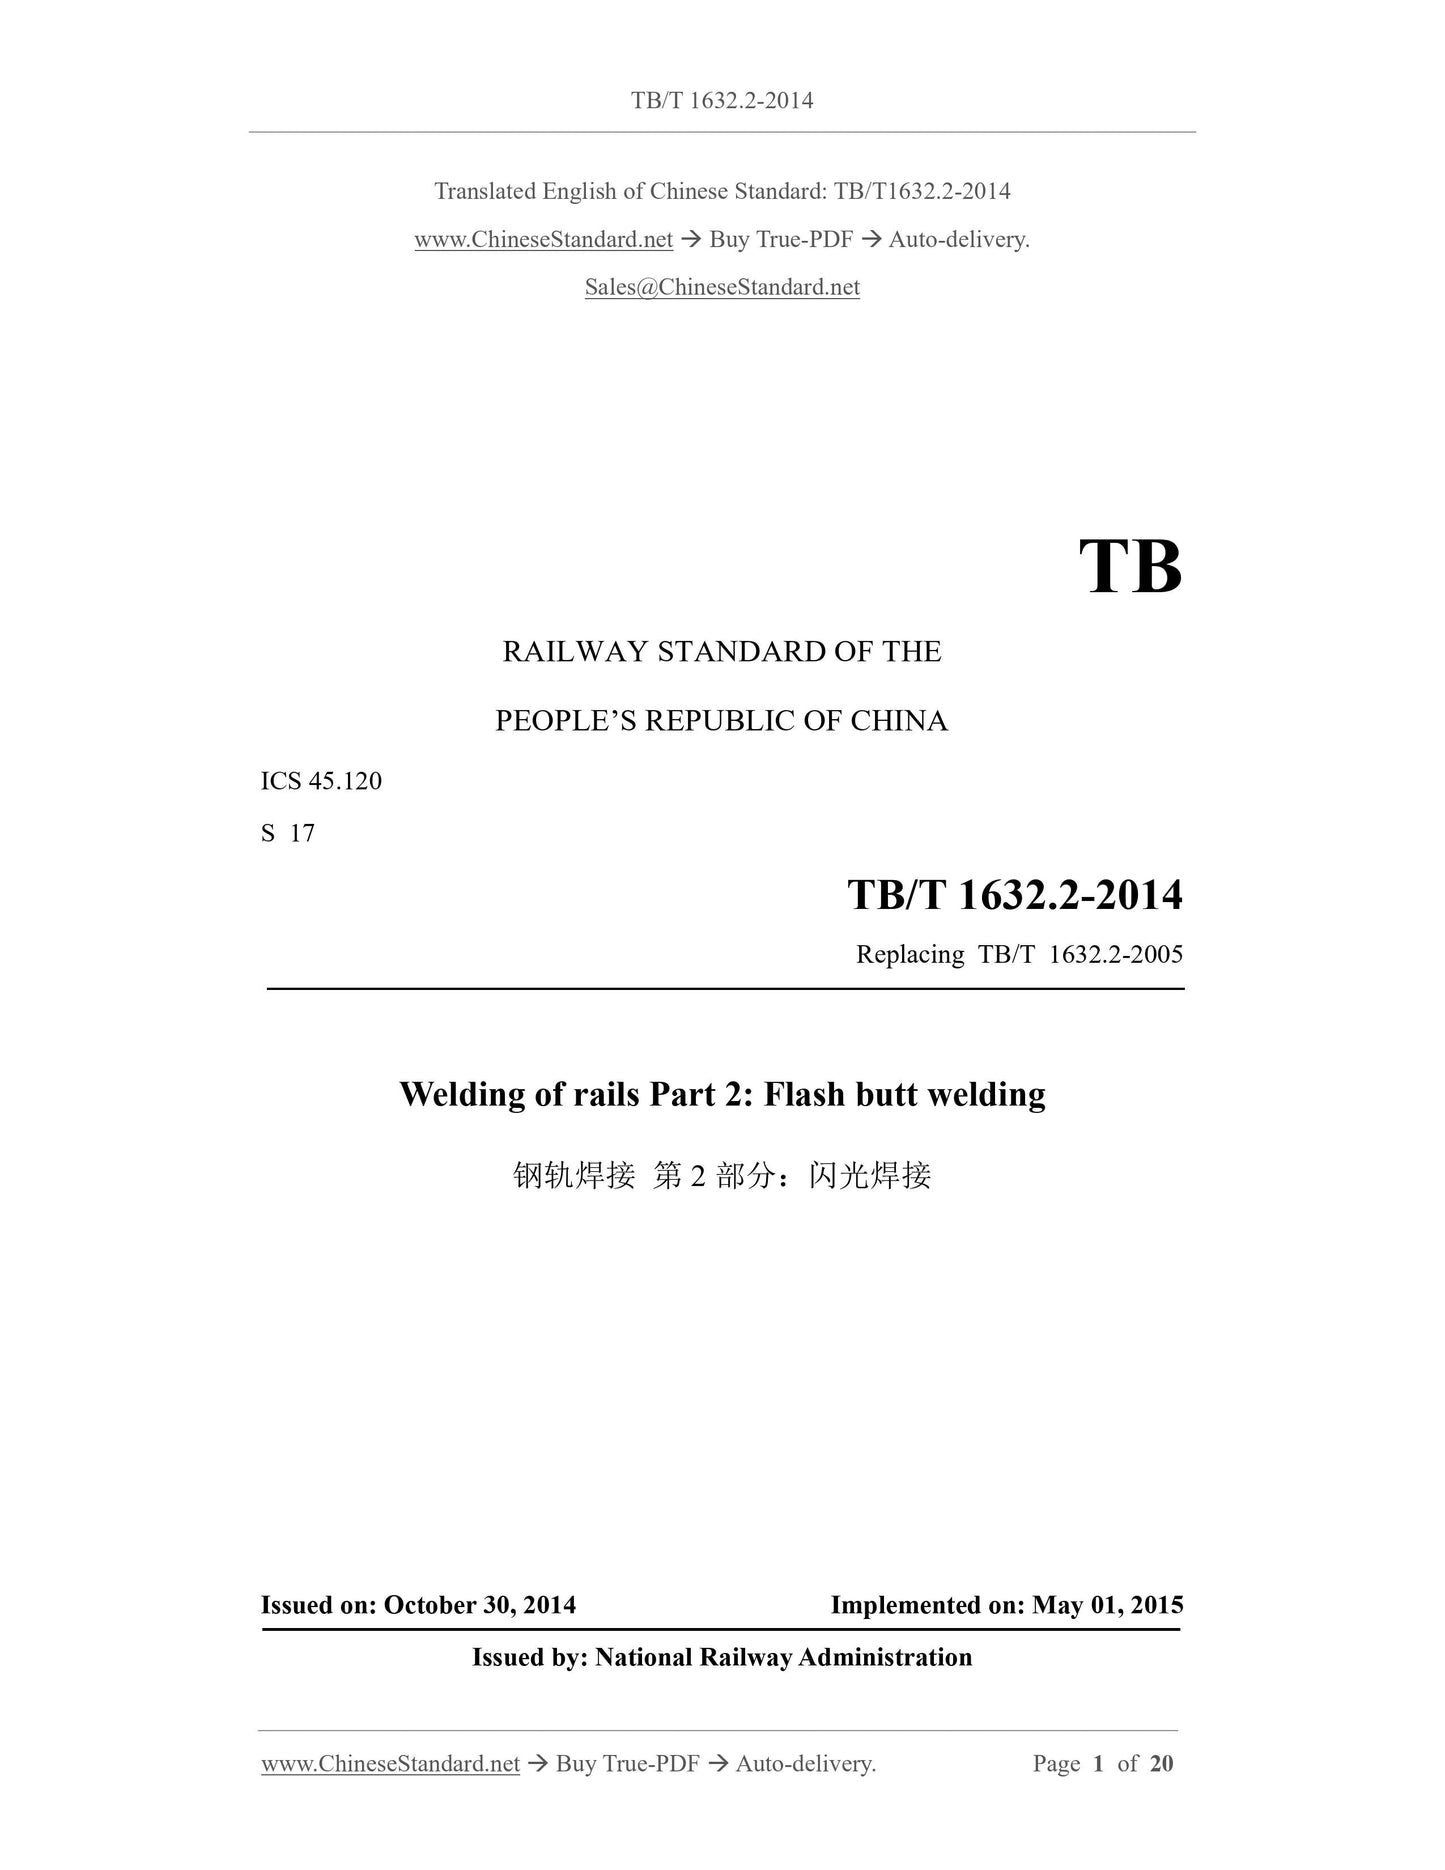 TB/T 1632.2-2014 Page 1